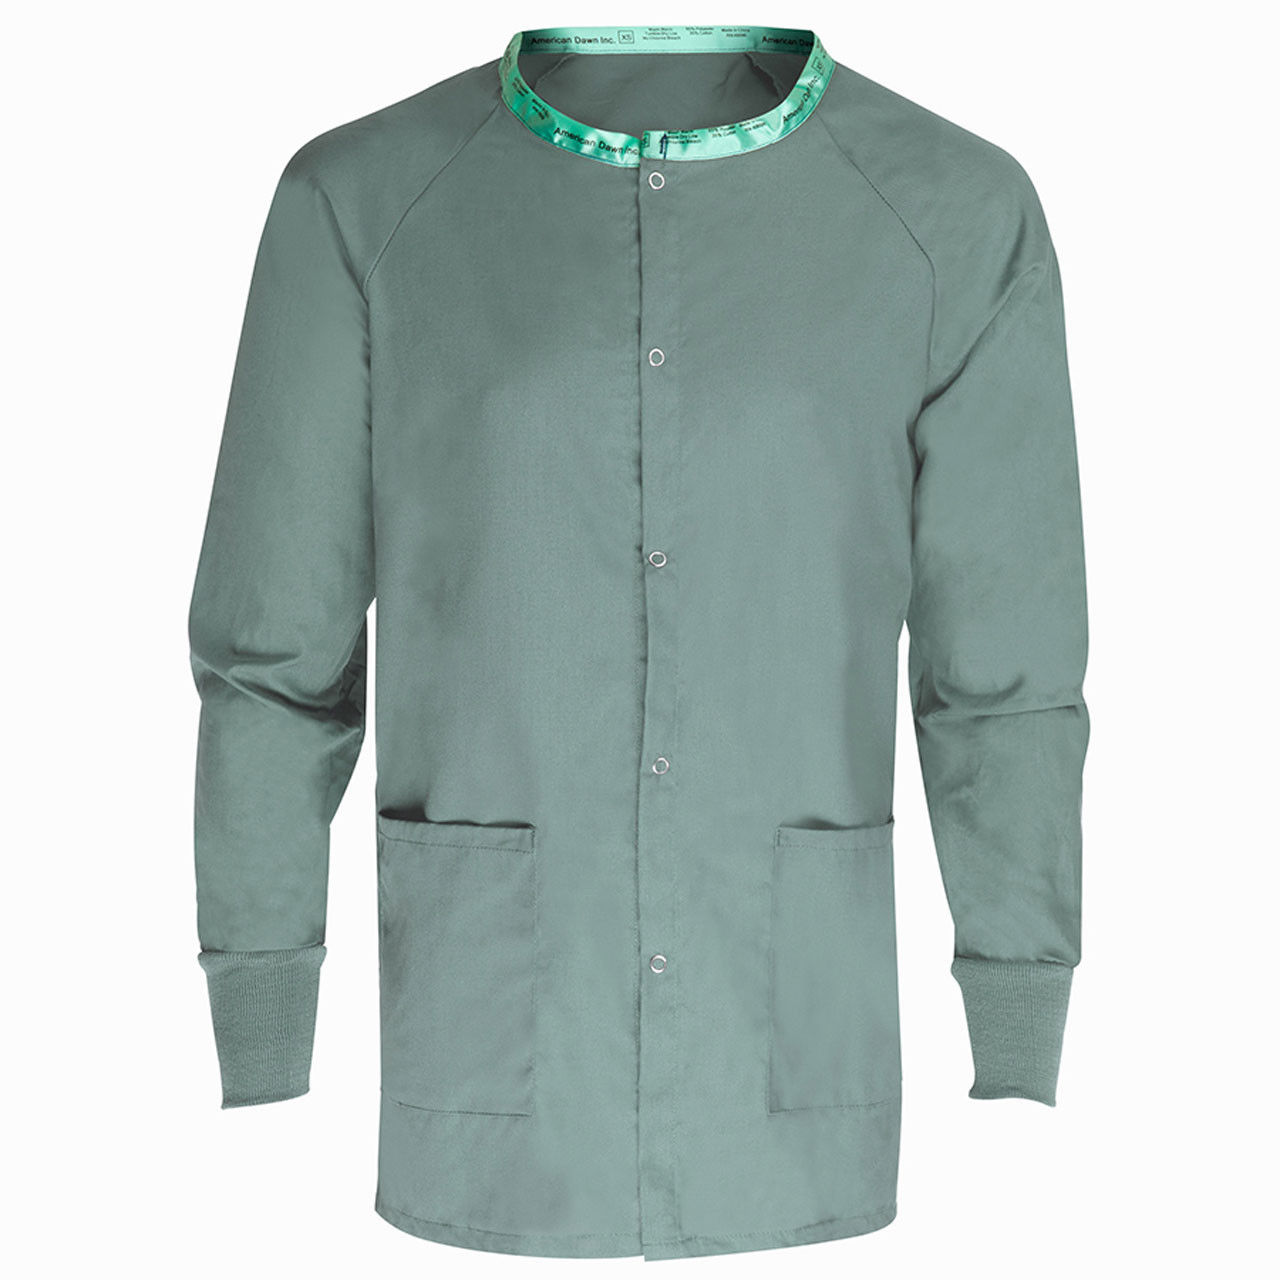 Can this scrub warm up jacket be worn in various professional settings?